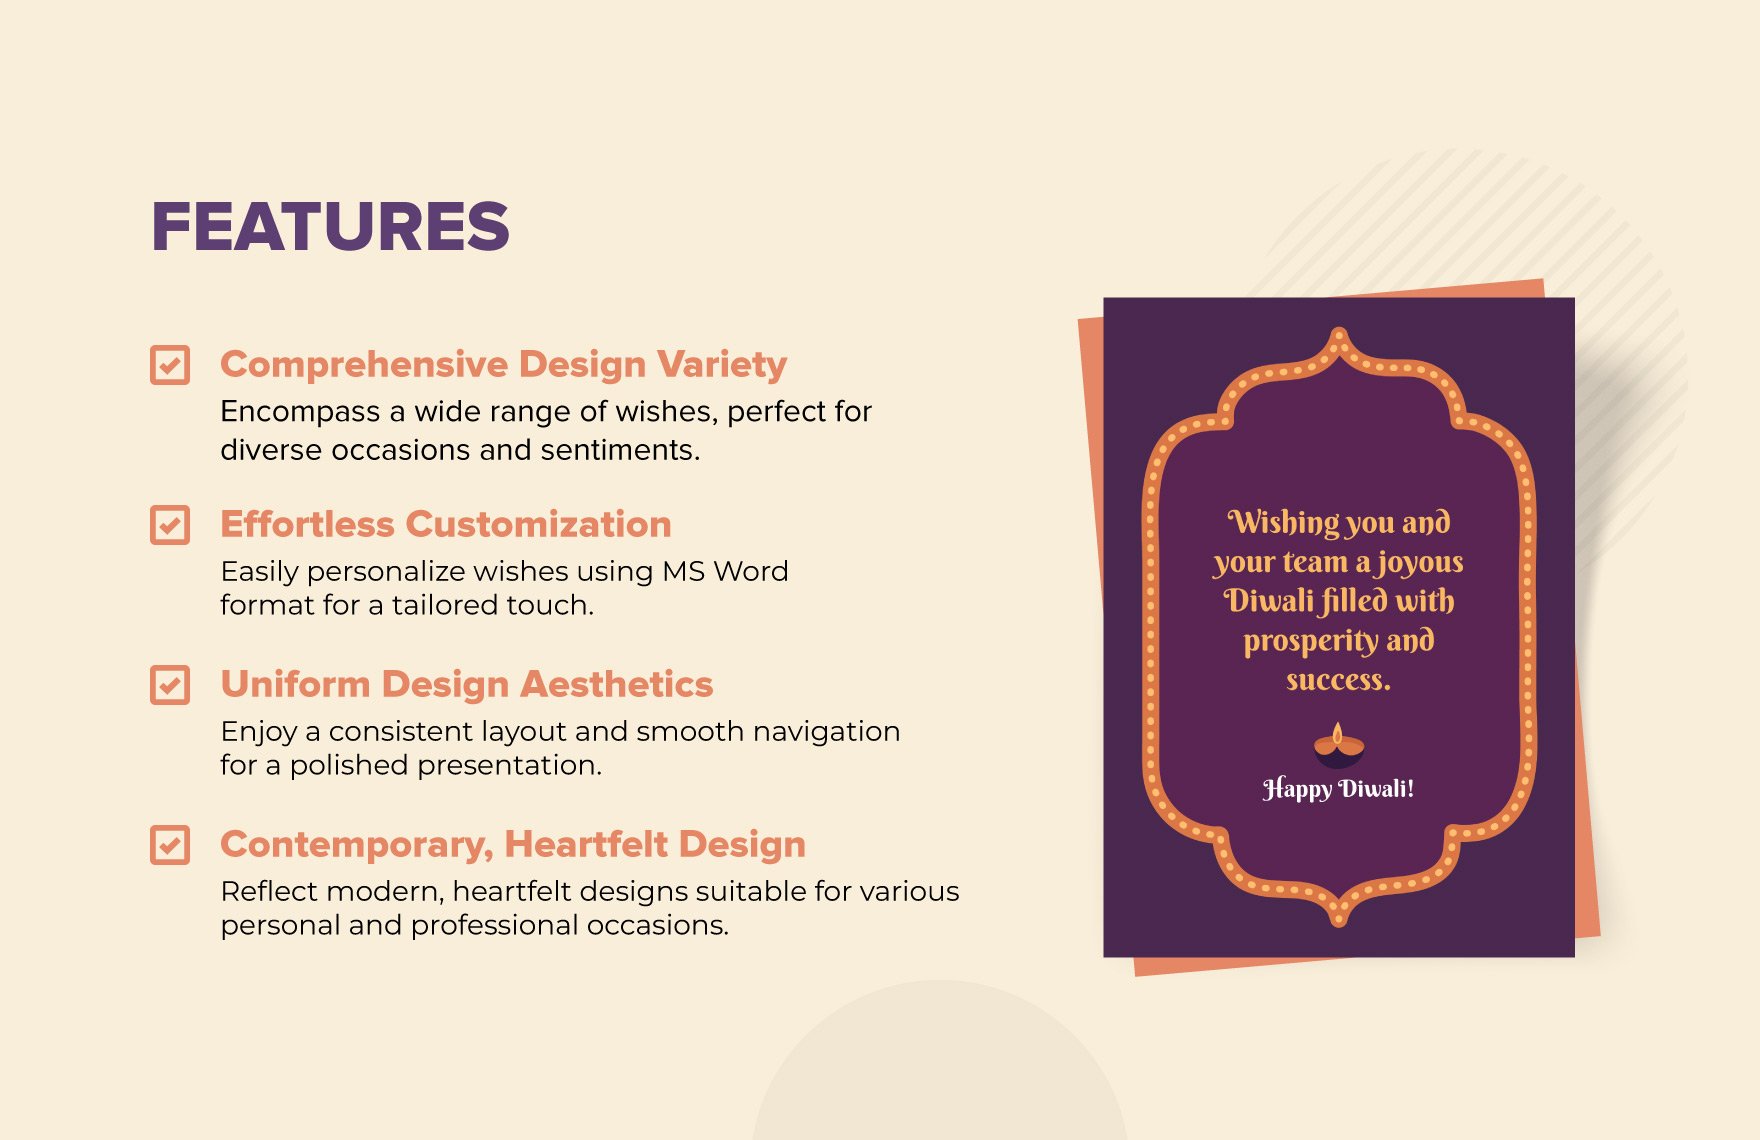 Corporate Diwali Wishes Template